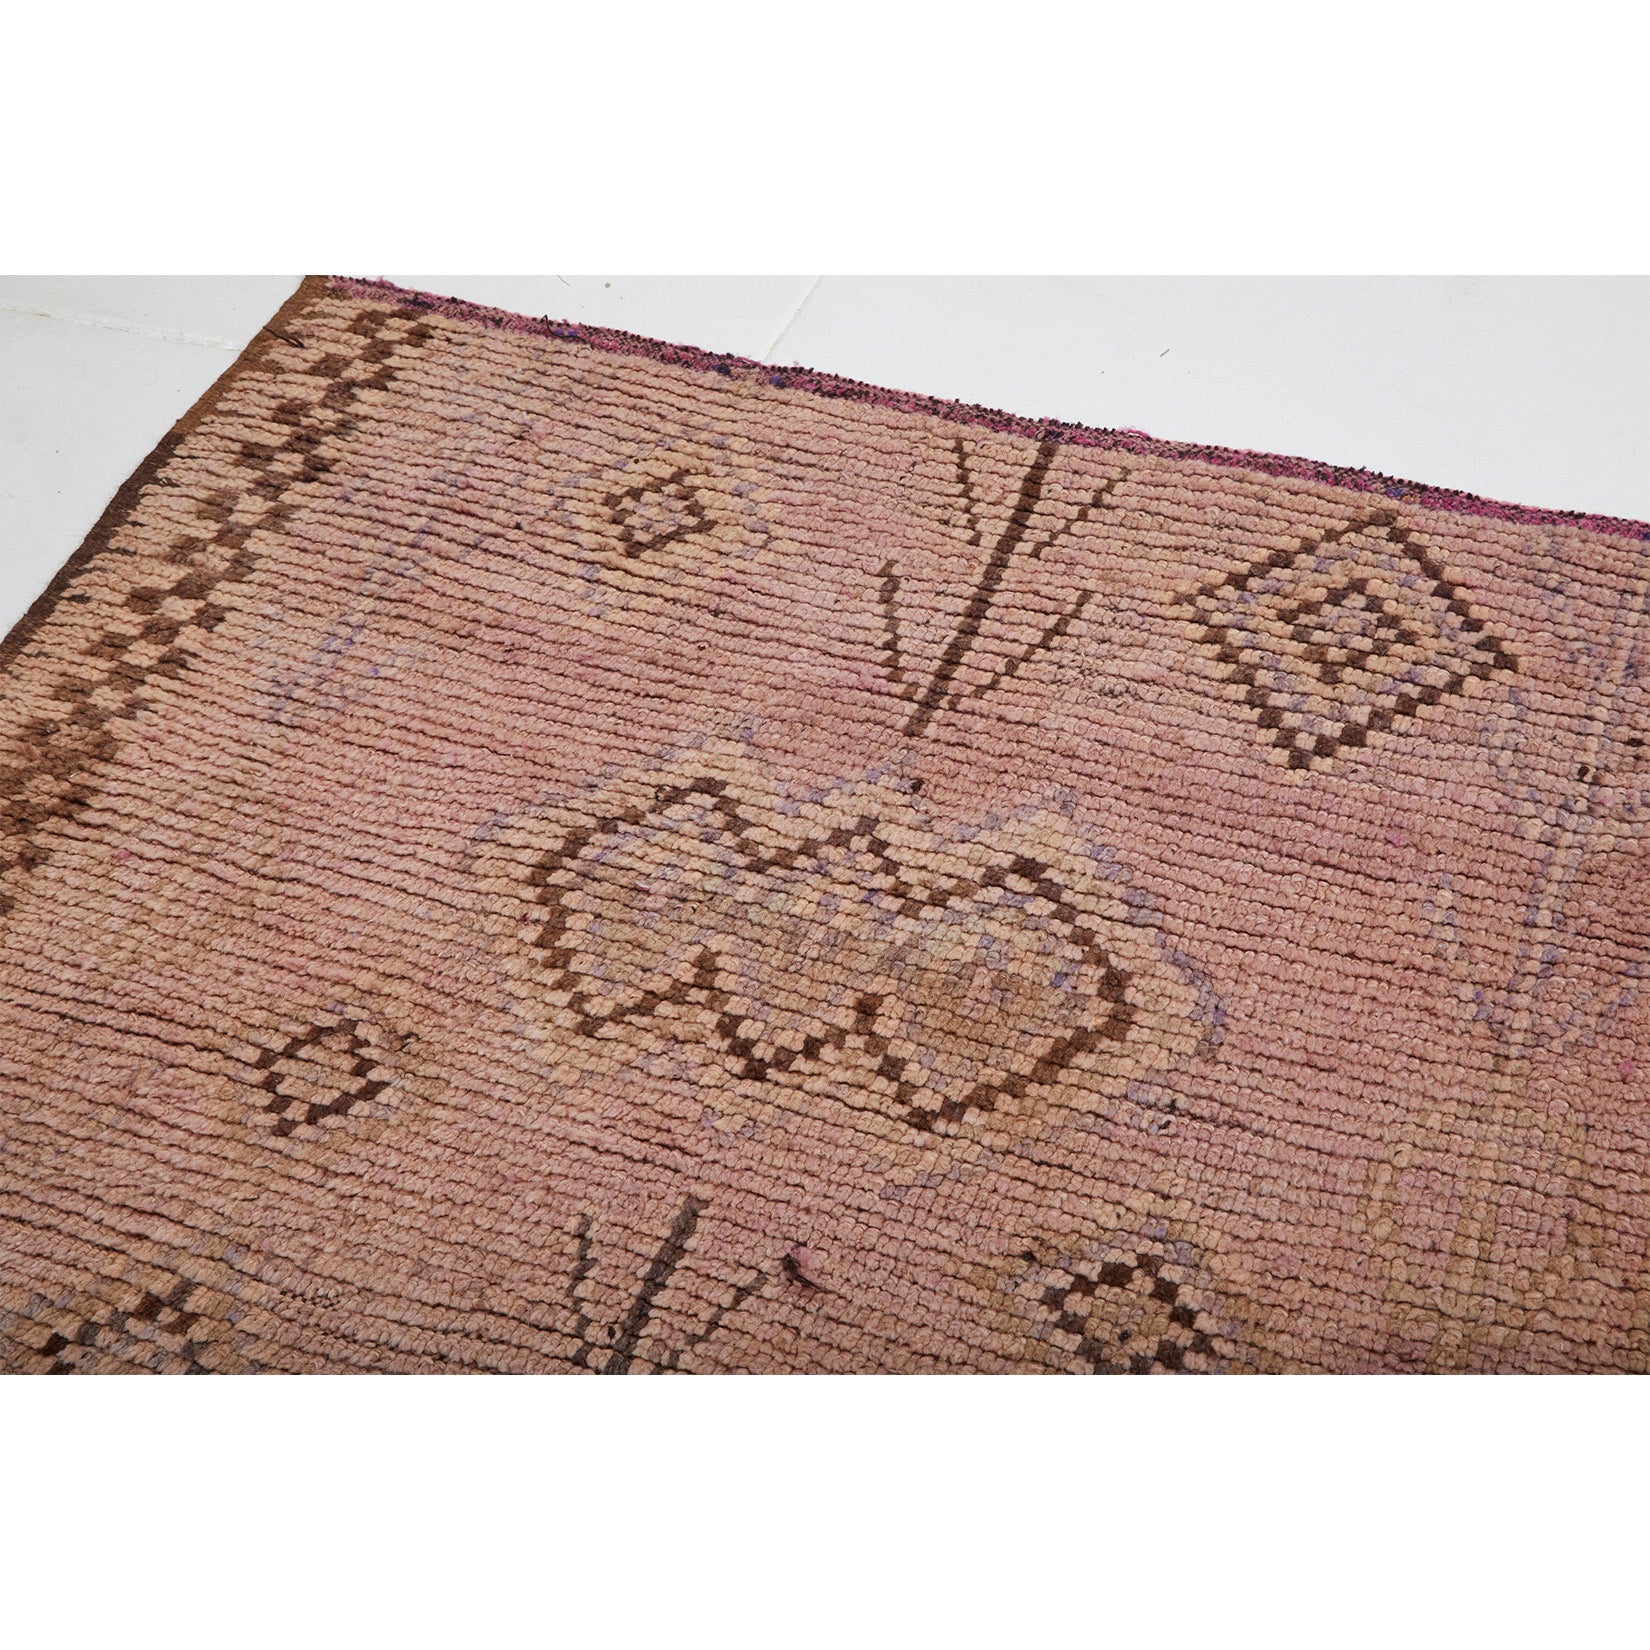 Detail of checkerboard vintage Moroccan rug with abstract diamond designs in brown and faded colors